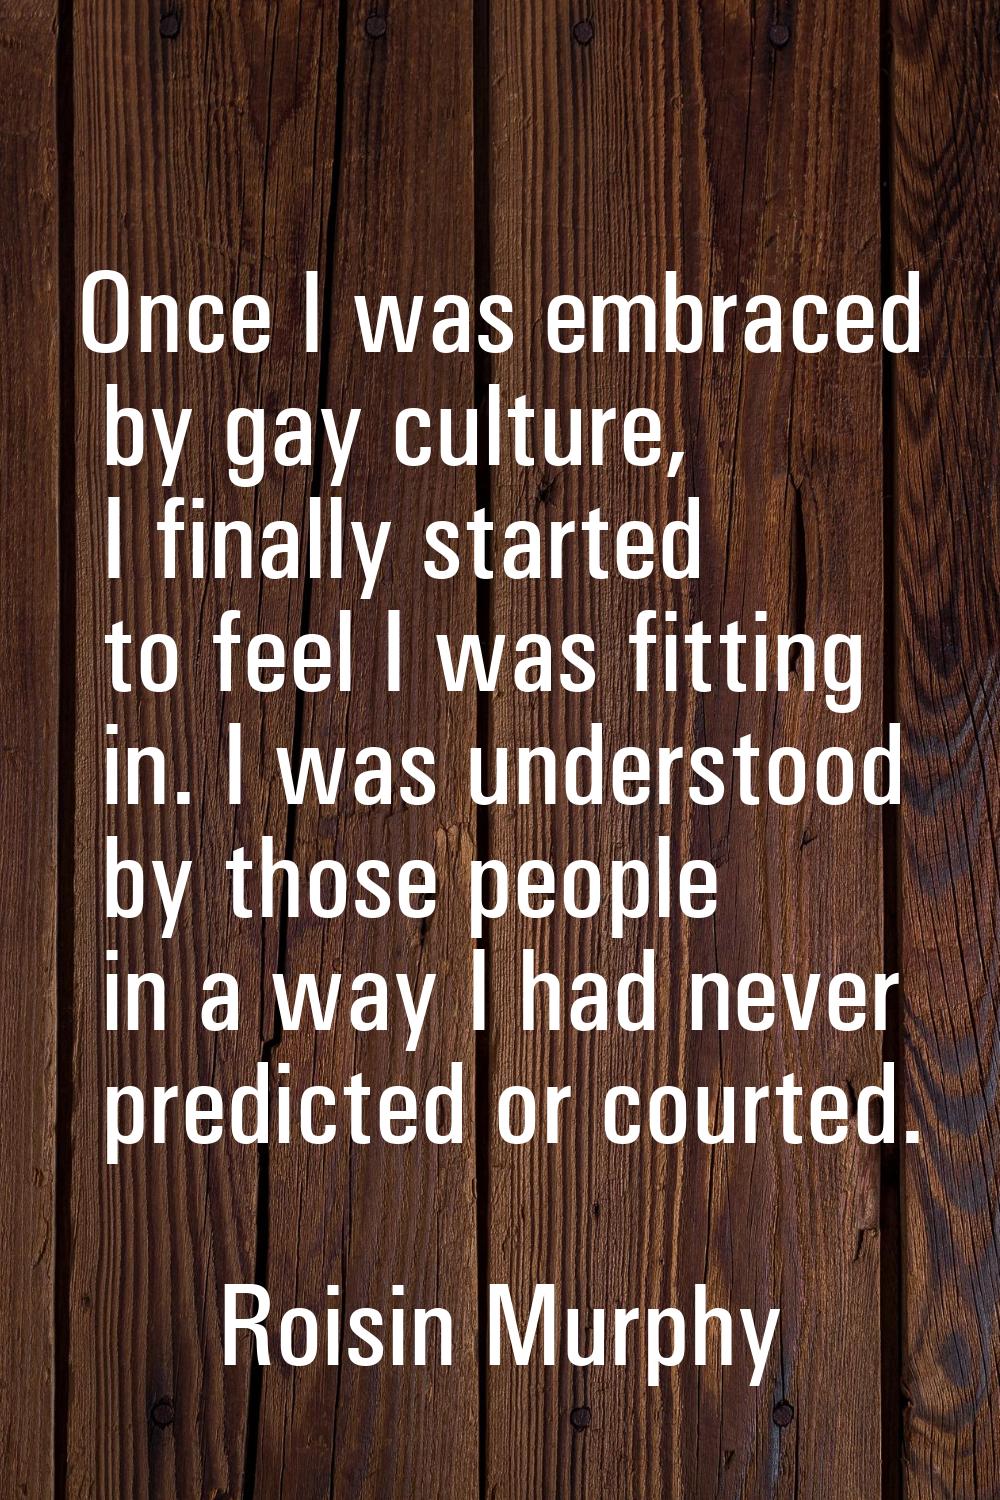 Once I was embraced by gay culture, I finally started to feel I was fitting in. I was understood by